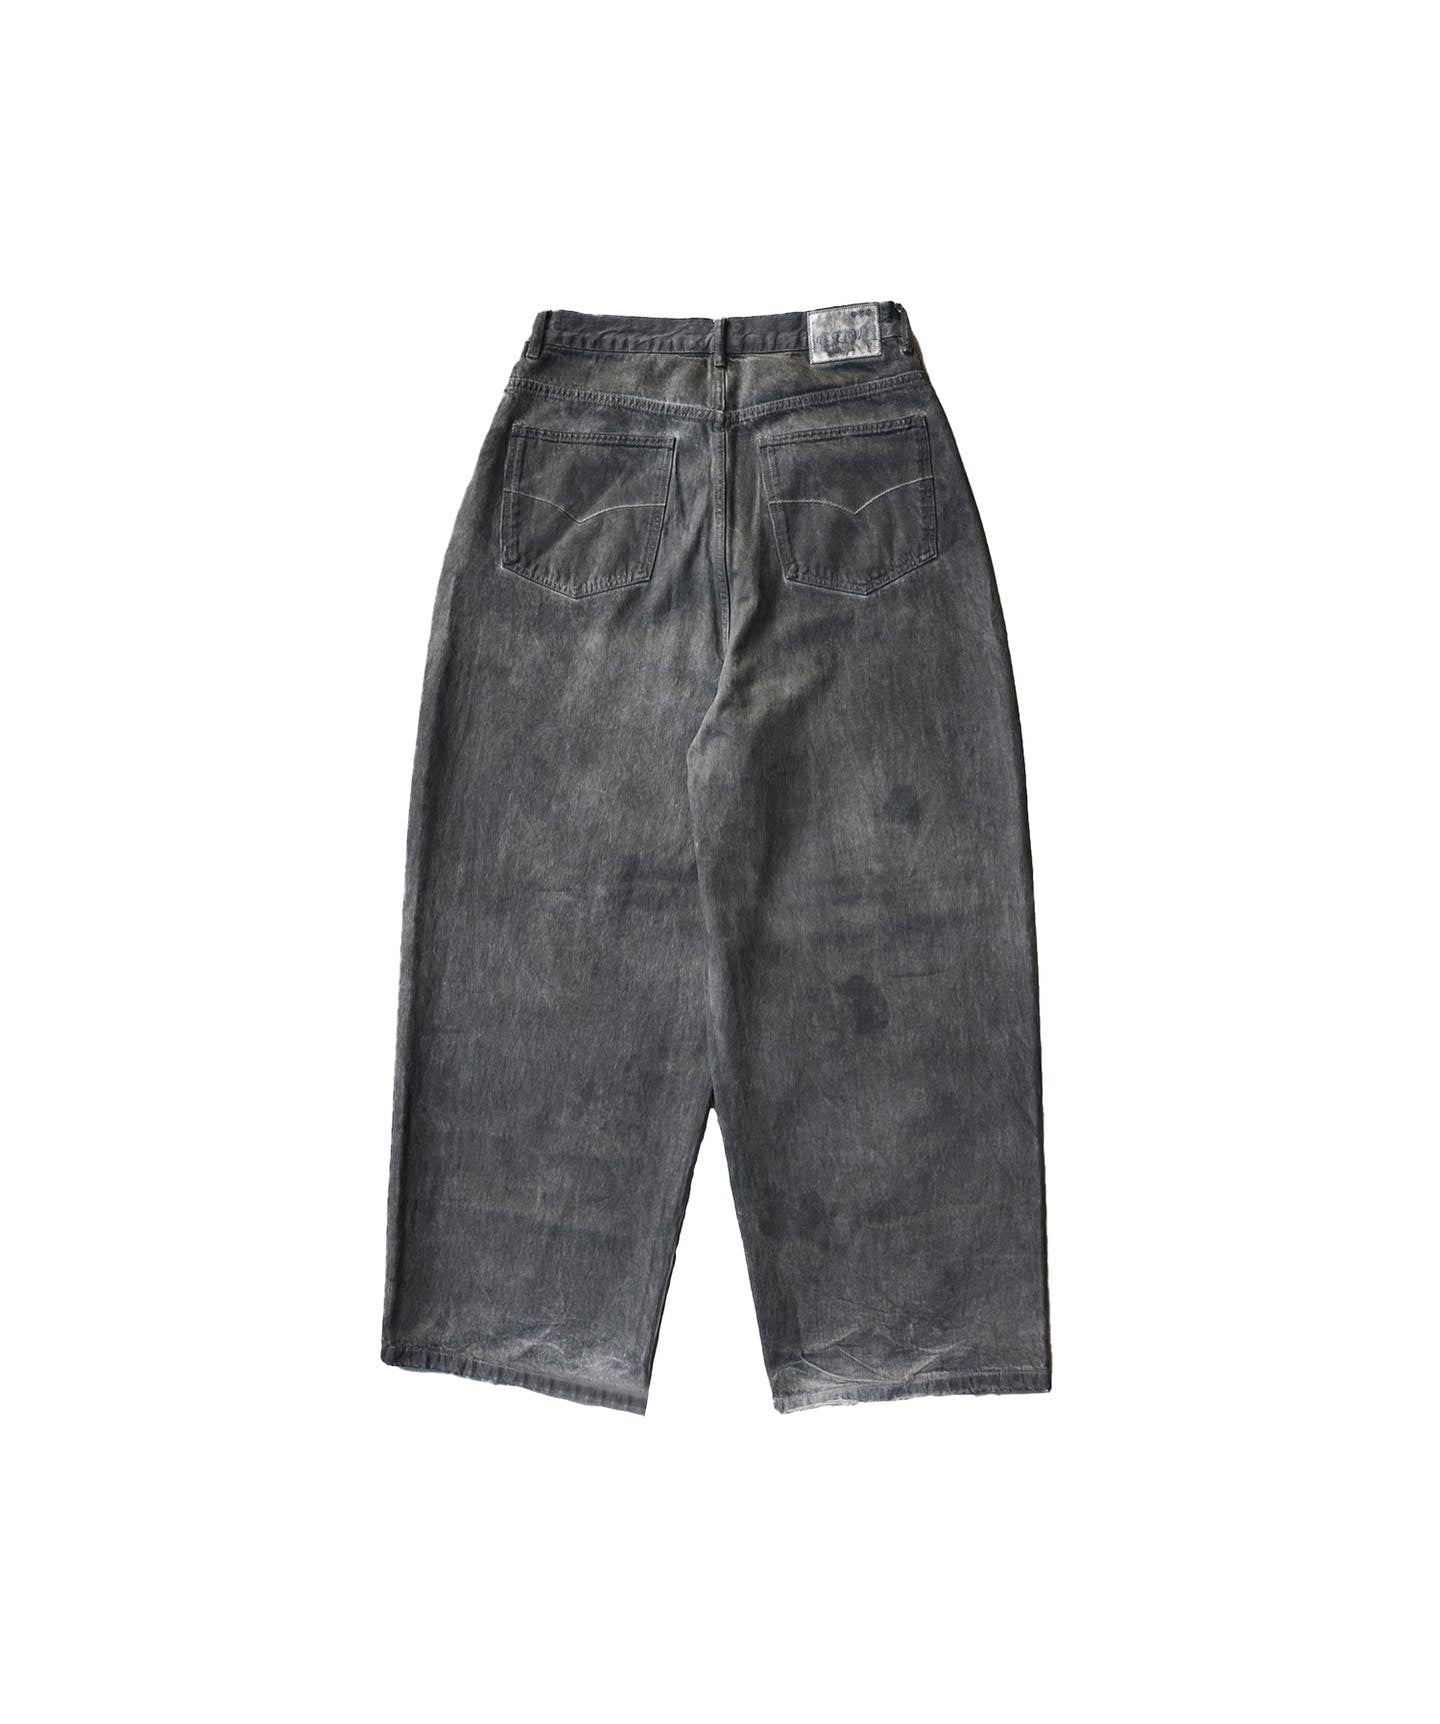 IRON GREY STAINED BAGGY DENIM (PRE ORDER)